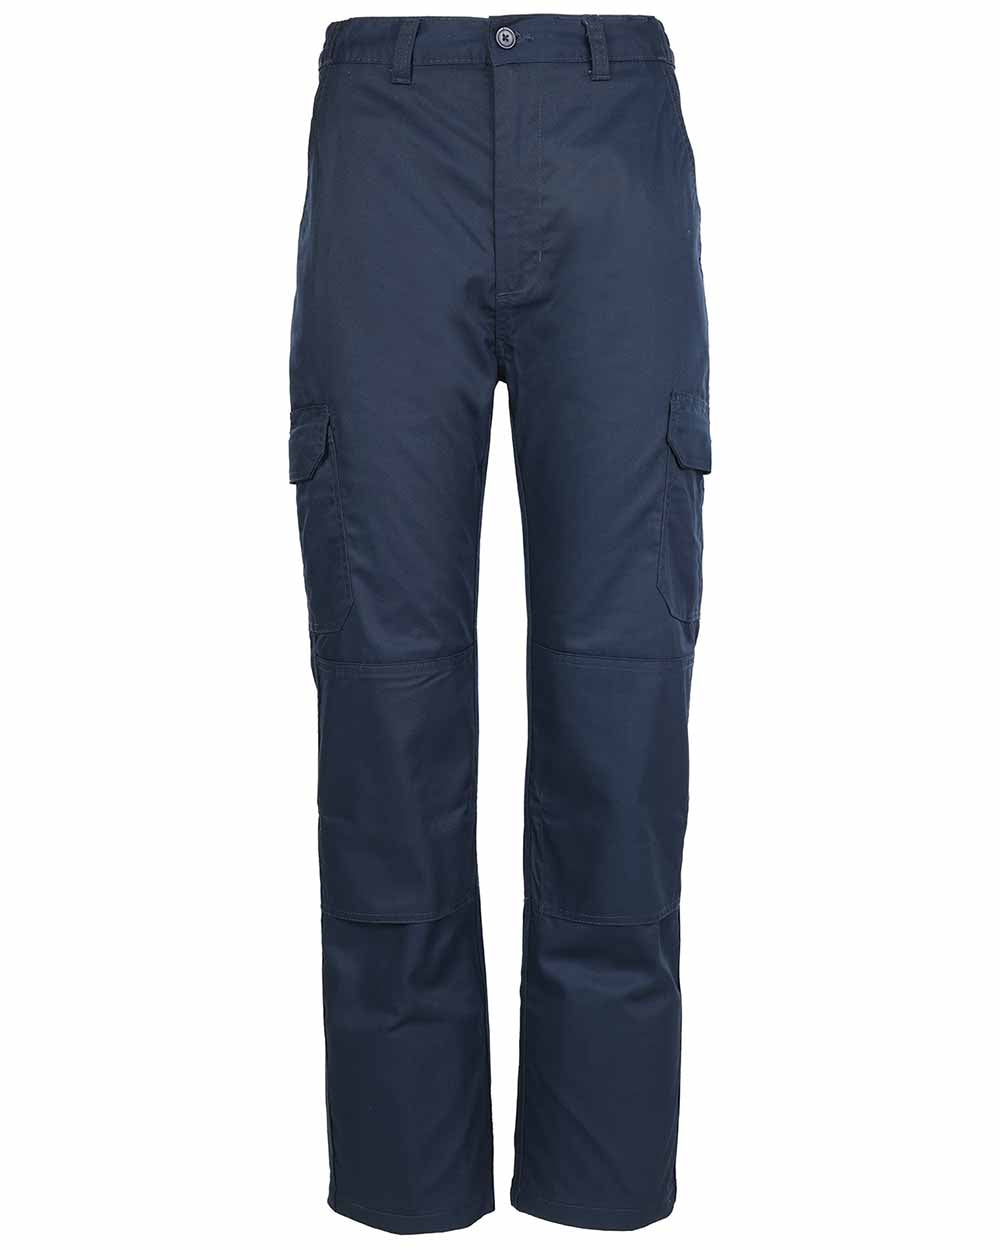 Fort Workforce Trousers in Navy 